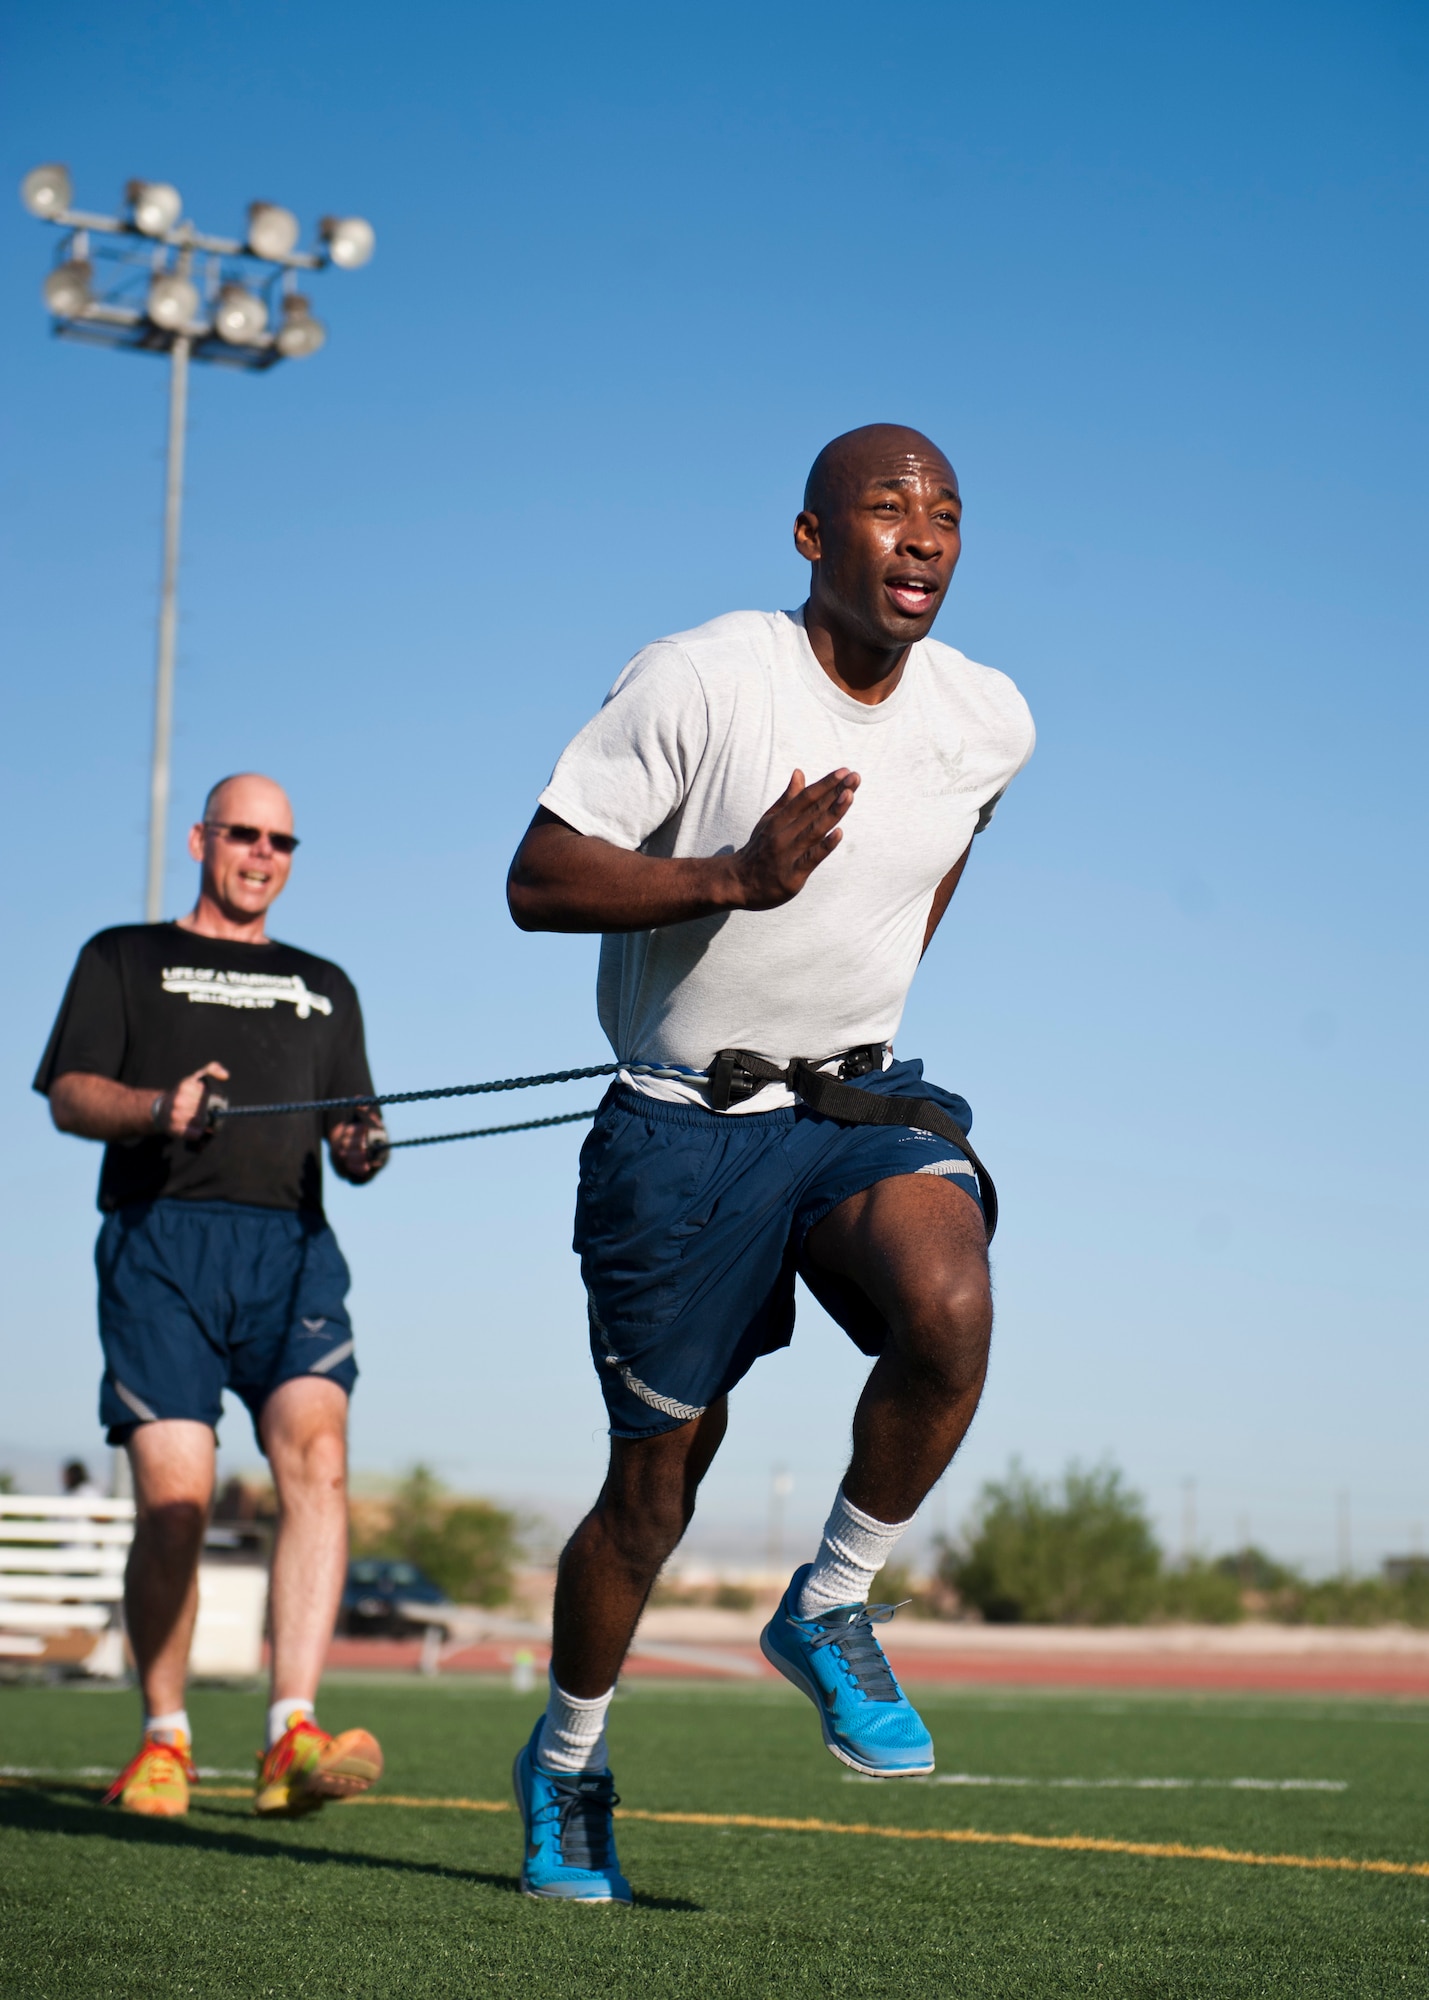 Senior Airman Terrence Dixon (front), 99th Security Forces Squadron commander support staff clerk, runs during the resistance portion of the Warrior Trained Fitness training session while being held by Master Sgt. Luke McCarthy, 99th SFS NCO in charge of range infrastructure, at the Warrior Fitness Center April 24, 2014, at Nellis Air Force Base, Nev. The WTF workout consisted of several stations which participants engaged in different exercises designed to increase cardio-vascular and muscular fitness. (U.S. Air Force photo by Airman 1st Class Thomas Spangler)